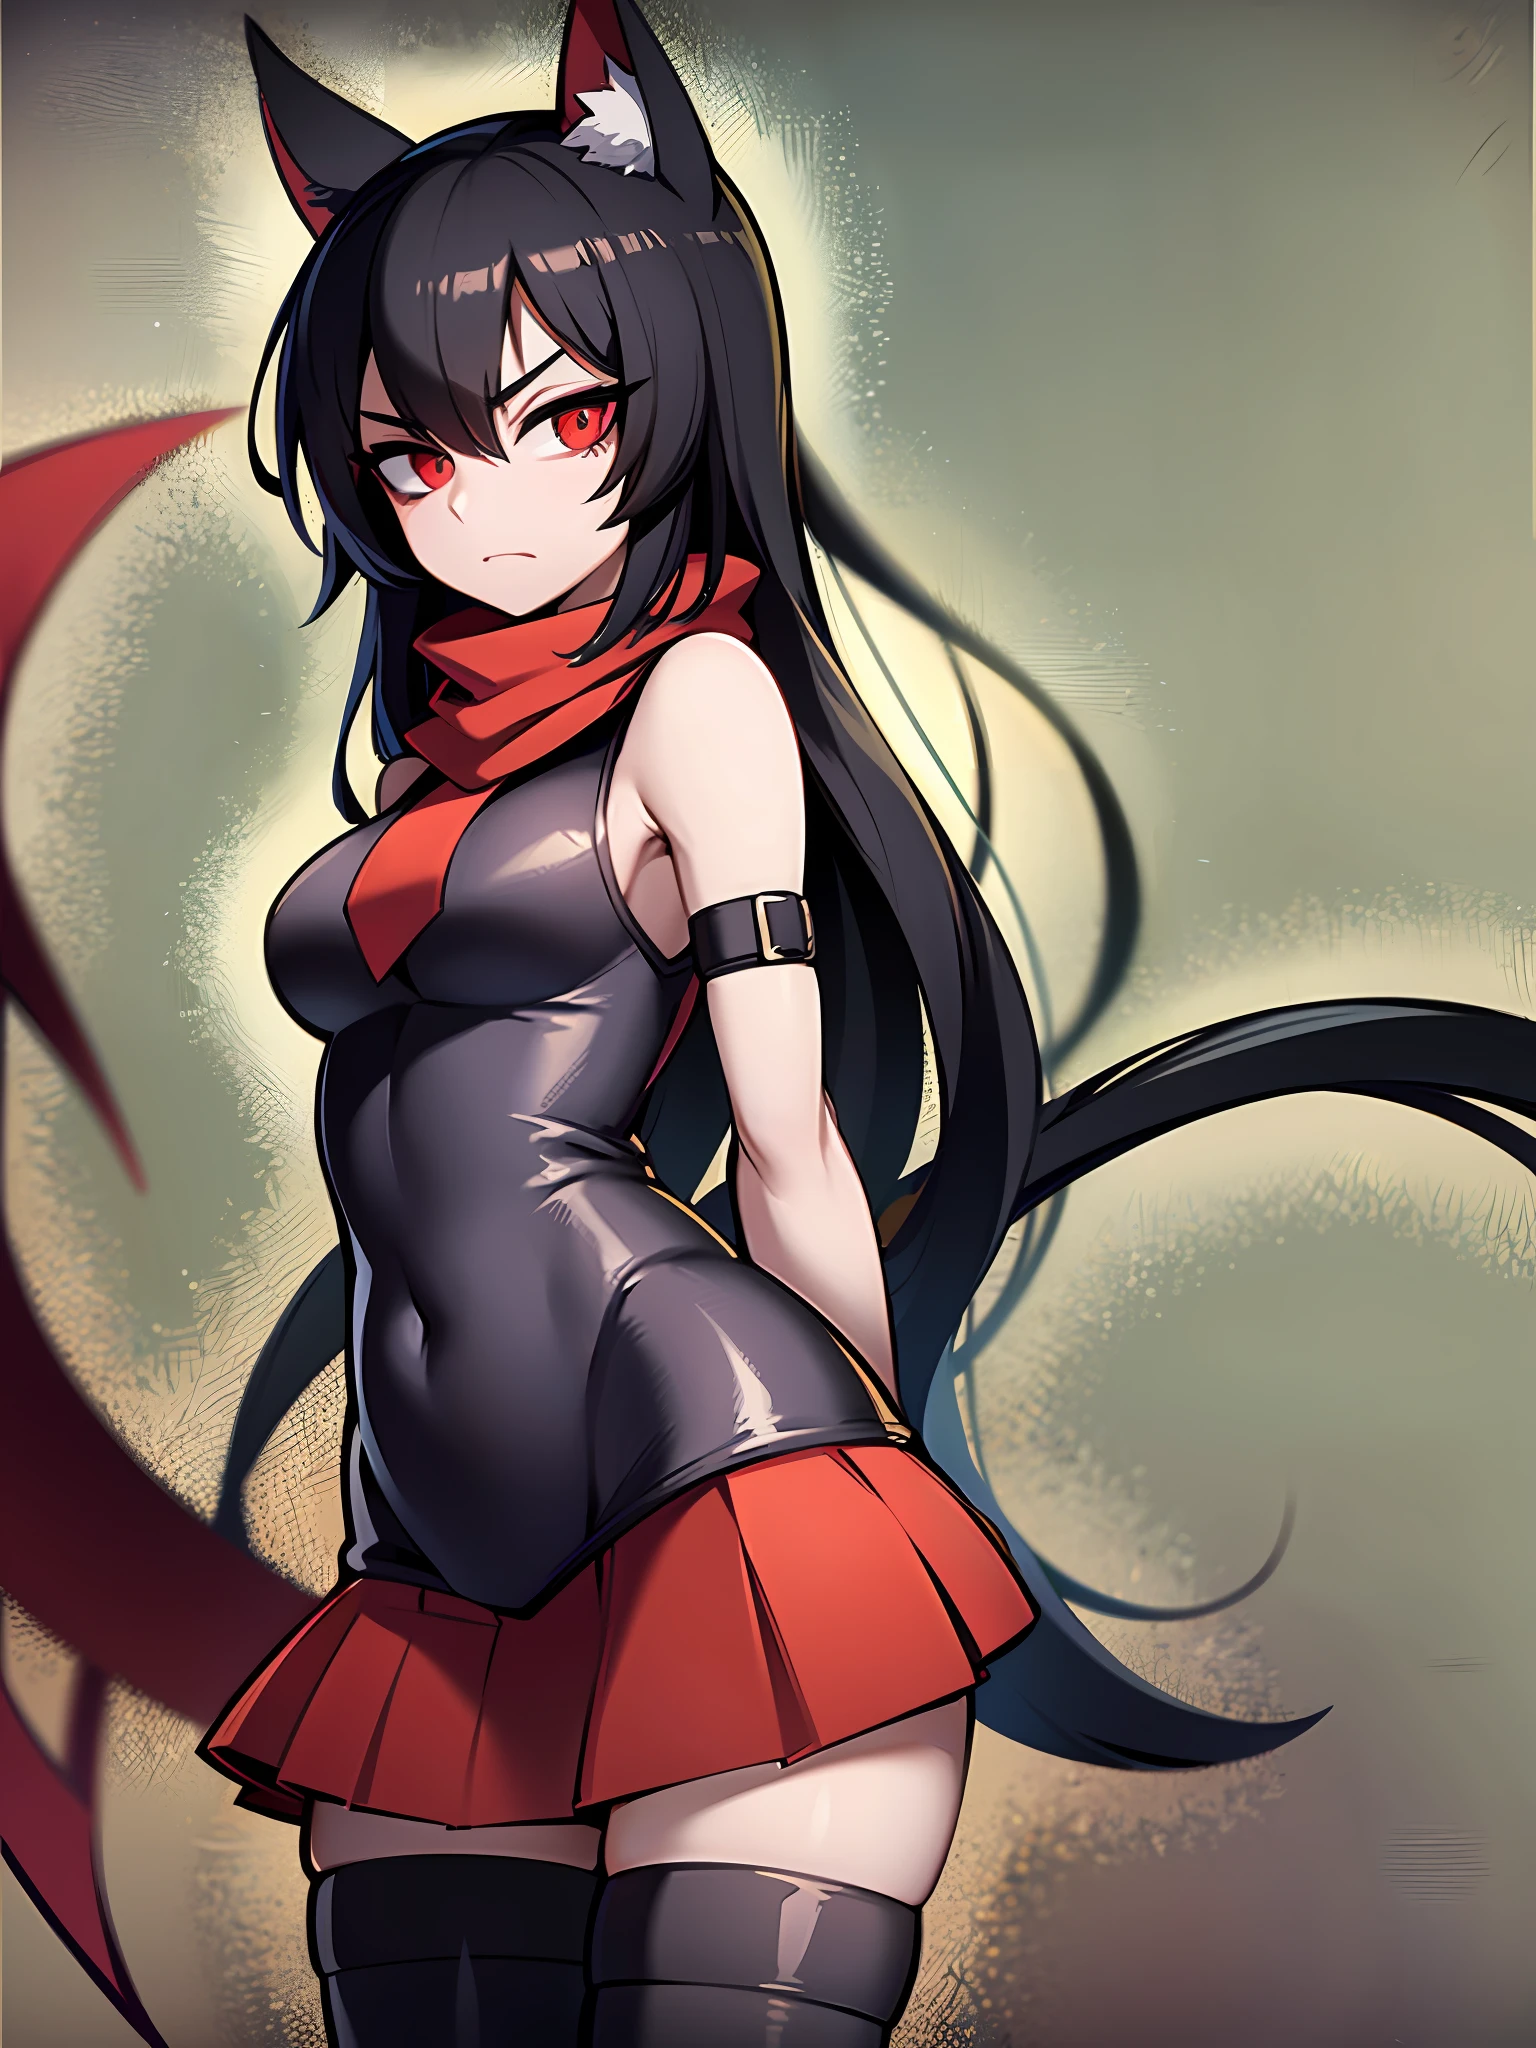 nekomimi girl, kunoichi, detailed arms, elongated arms, cat ears, tail, tall woman, black hair, red eyes, detailed hands, detailed feet, high quality colored sketch, red background, ultra detailed, 8k resolution, brown leather vest, brown skirt, no shoes, standing, red scarf, ninja accessories, deep shadows, sharp focus, yandere, dynamic angle, sadistic expression,  empty eyes